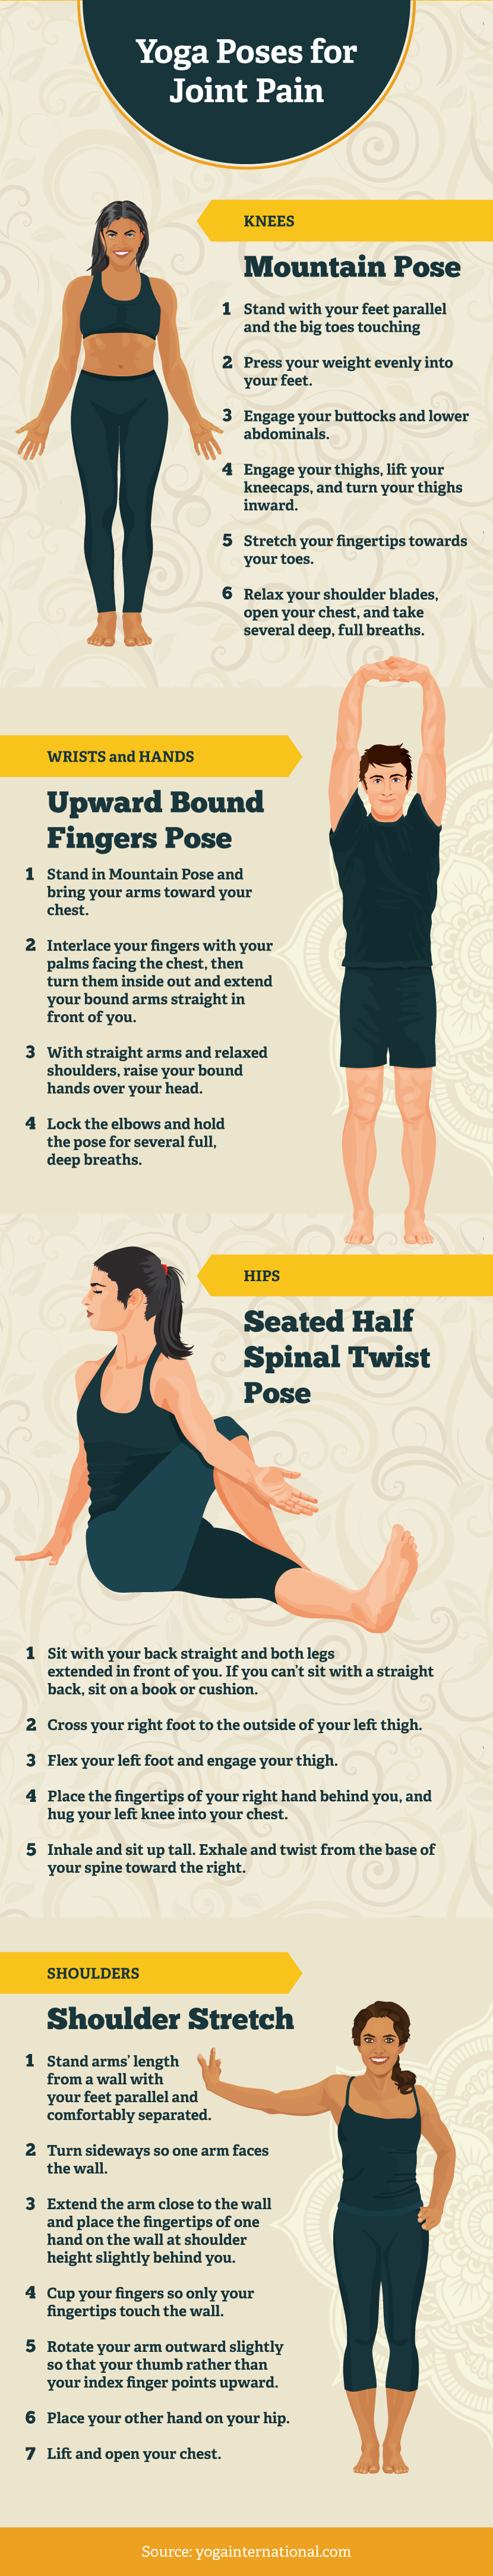 Yoga Poses For Joint Pain - Yoga For Your Joints